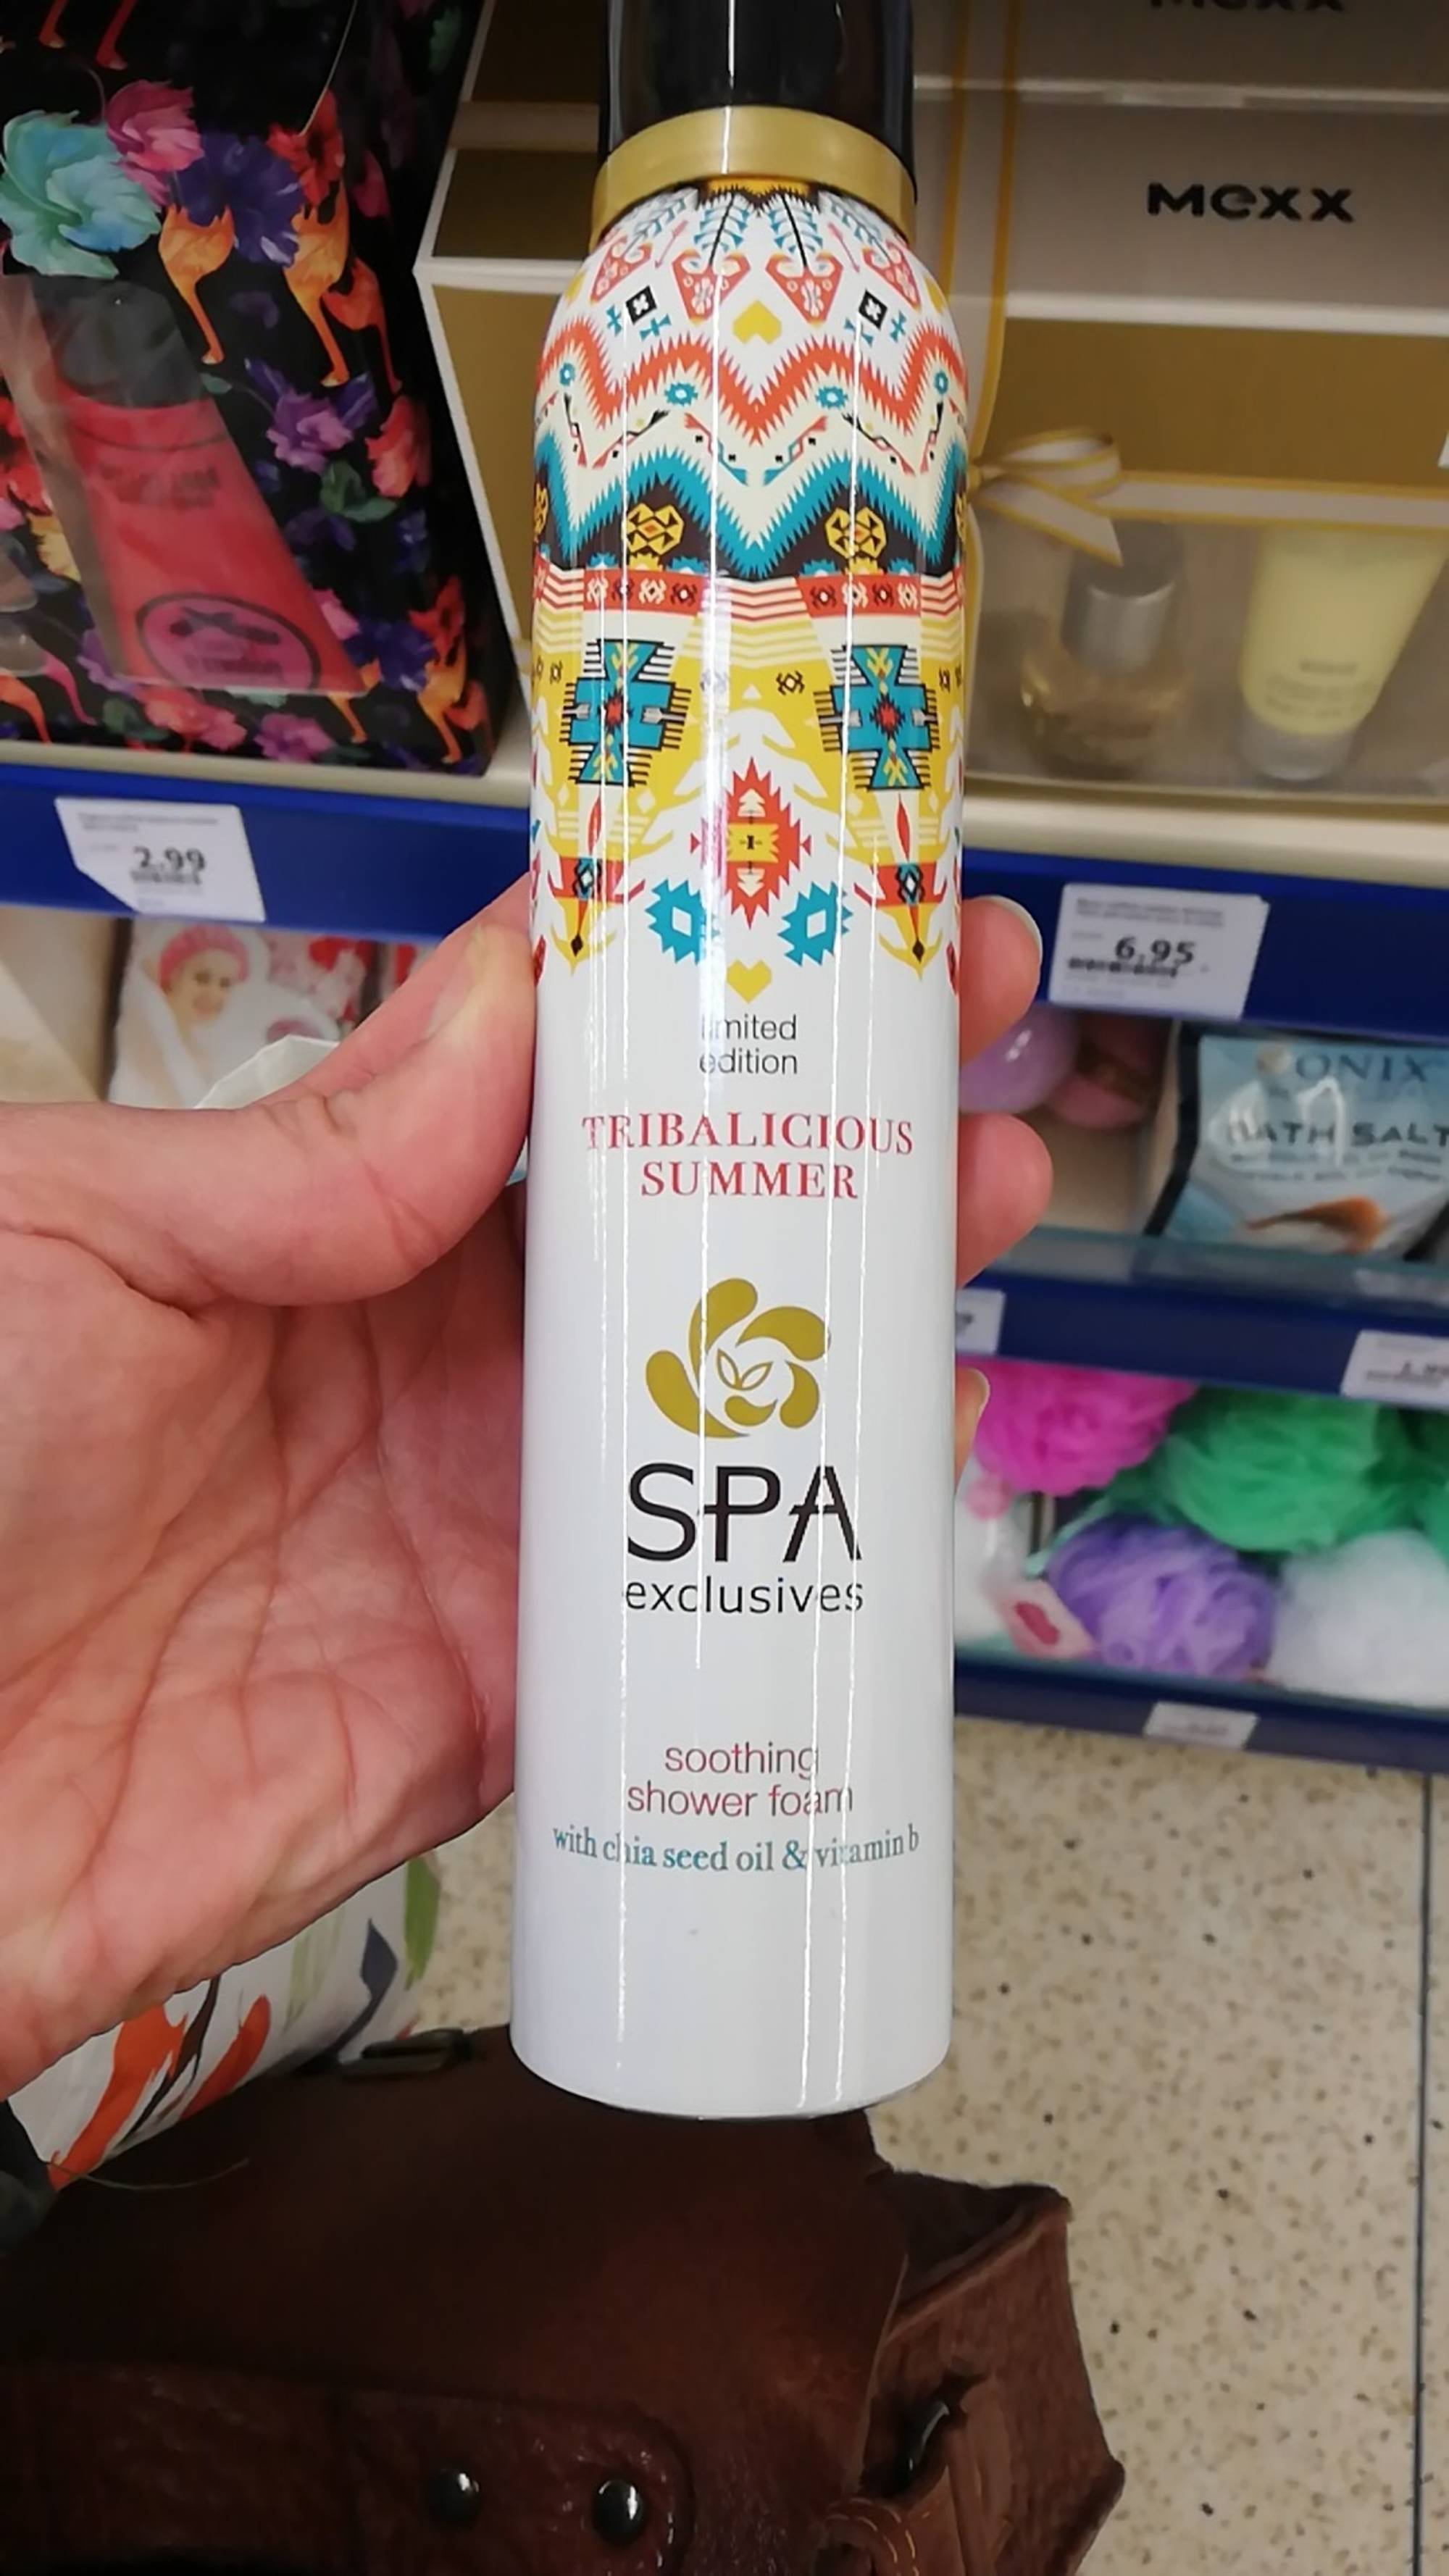 SPA EXCLUSIVES - Tribalicious Summer - Soothing shower foam